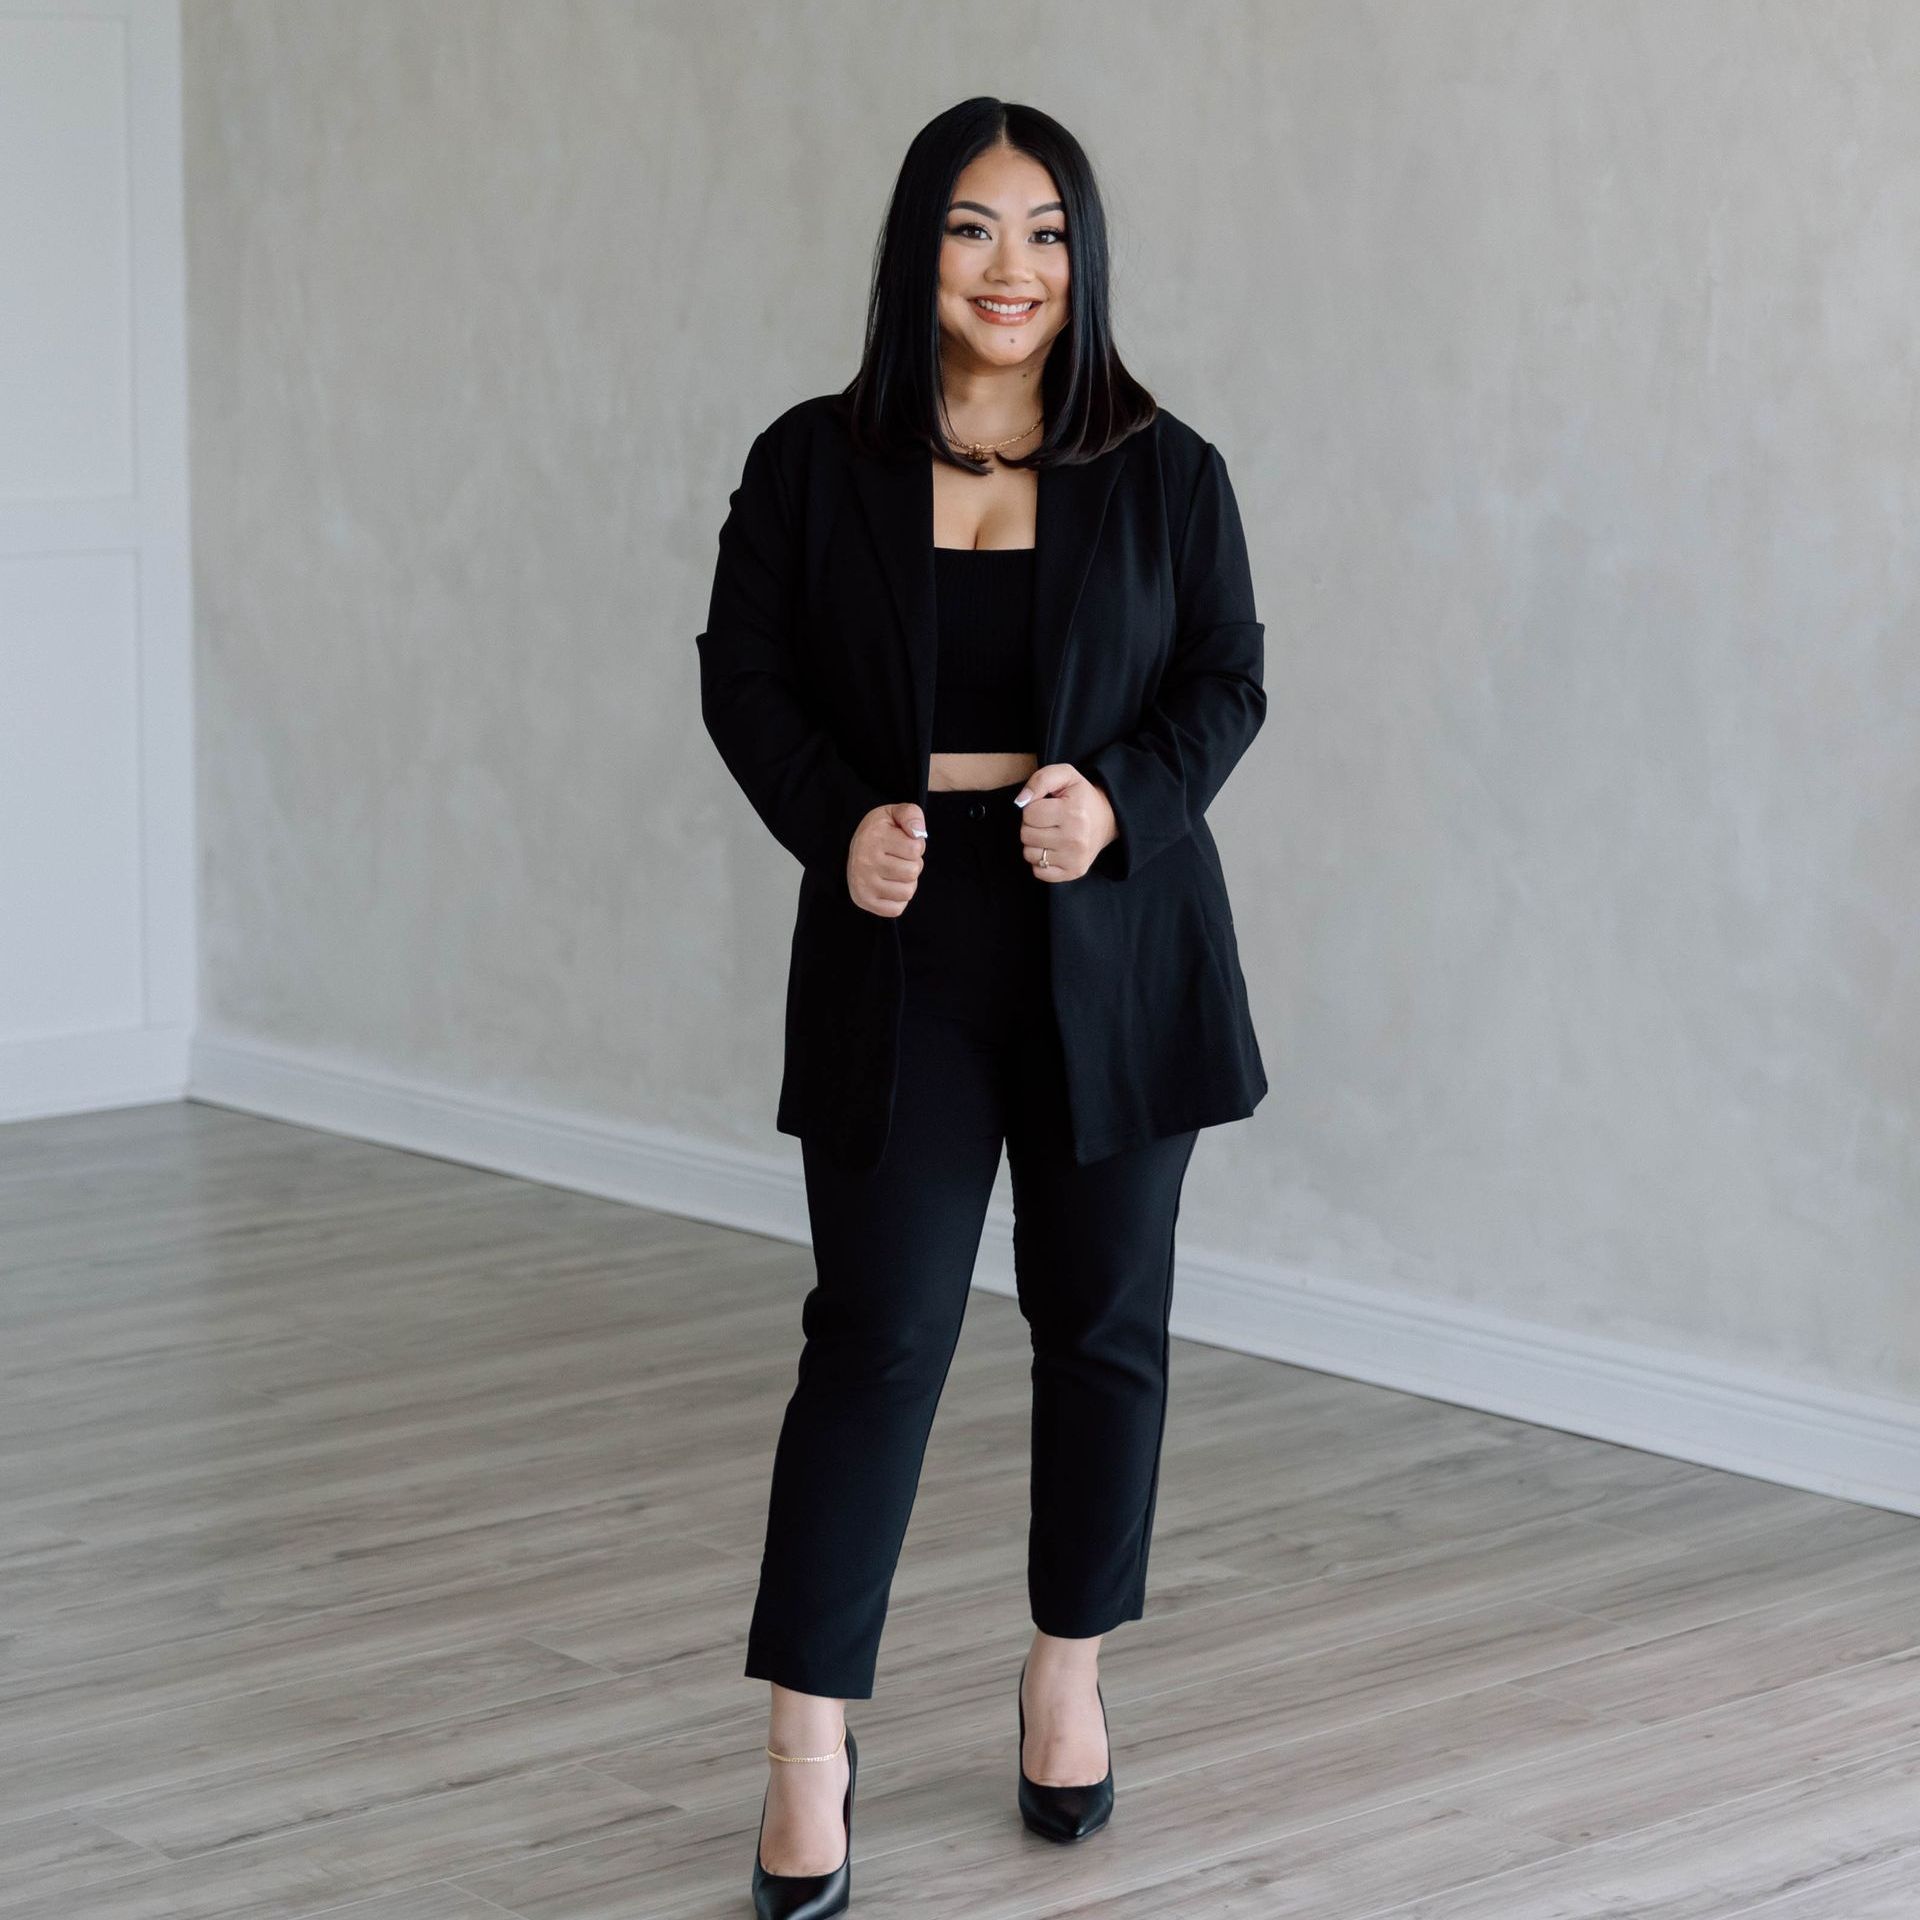 A woman is standing in a room wearing a black suit and heels.